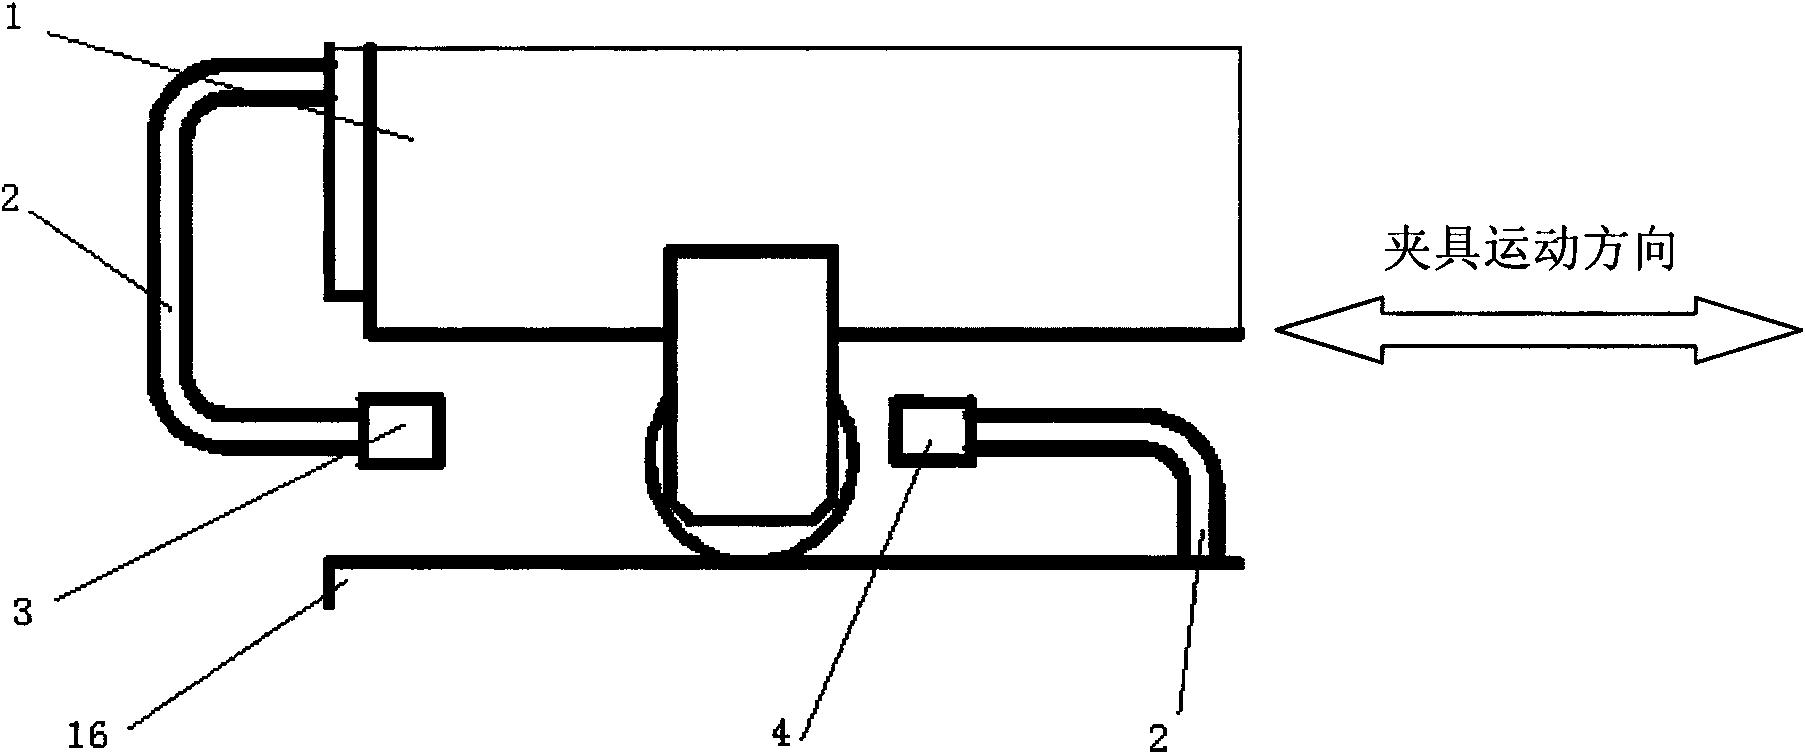 Automatic butting device of radio frequency plug